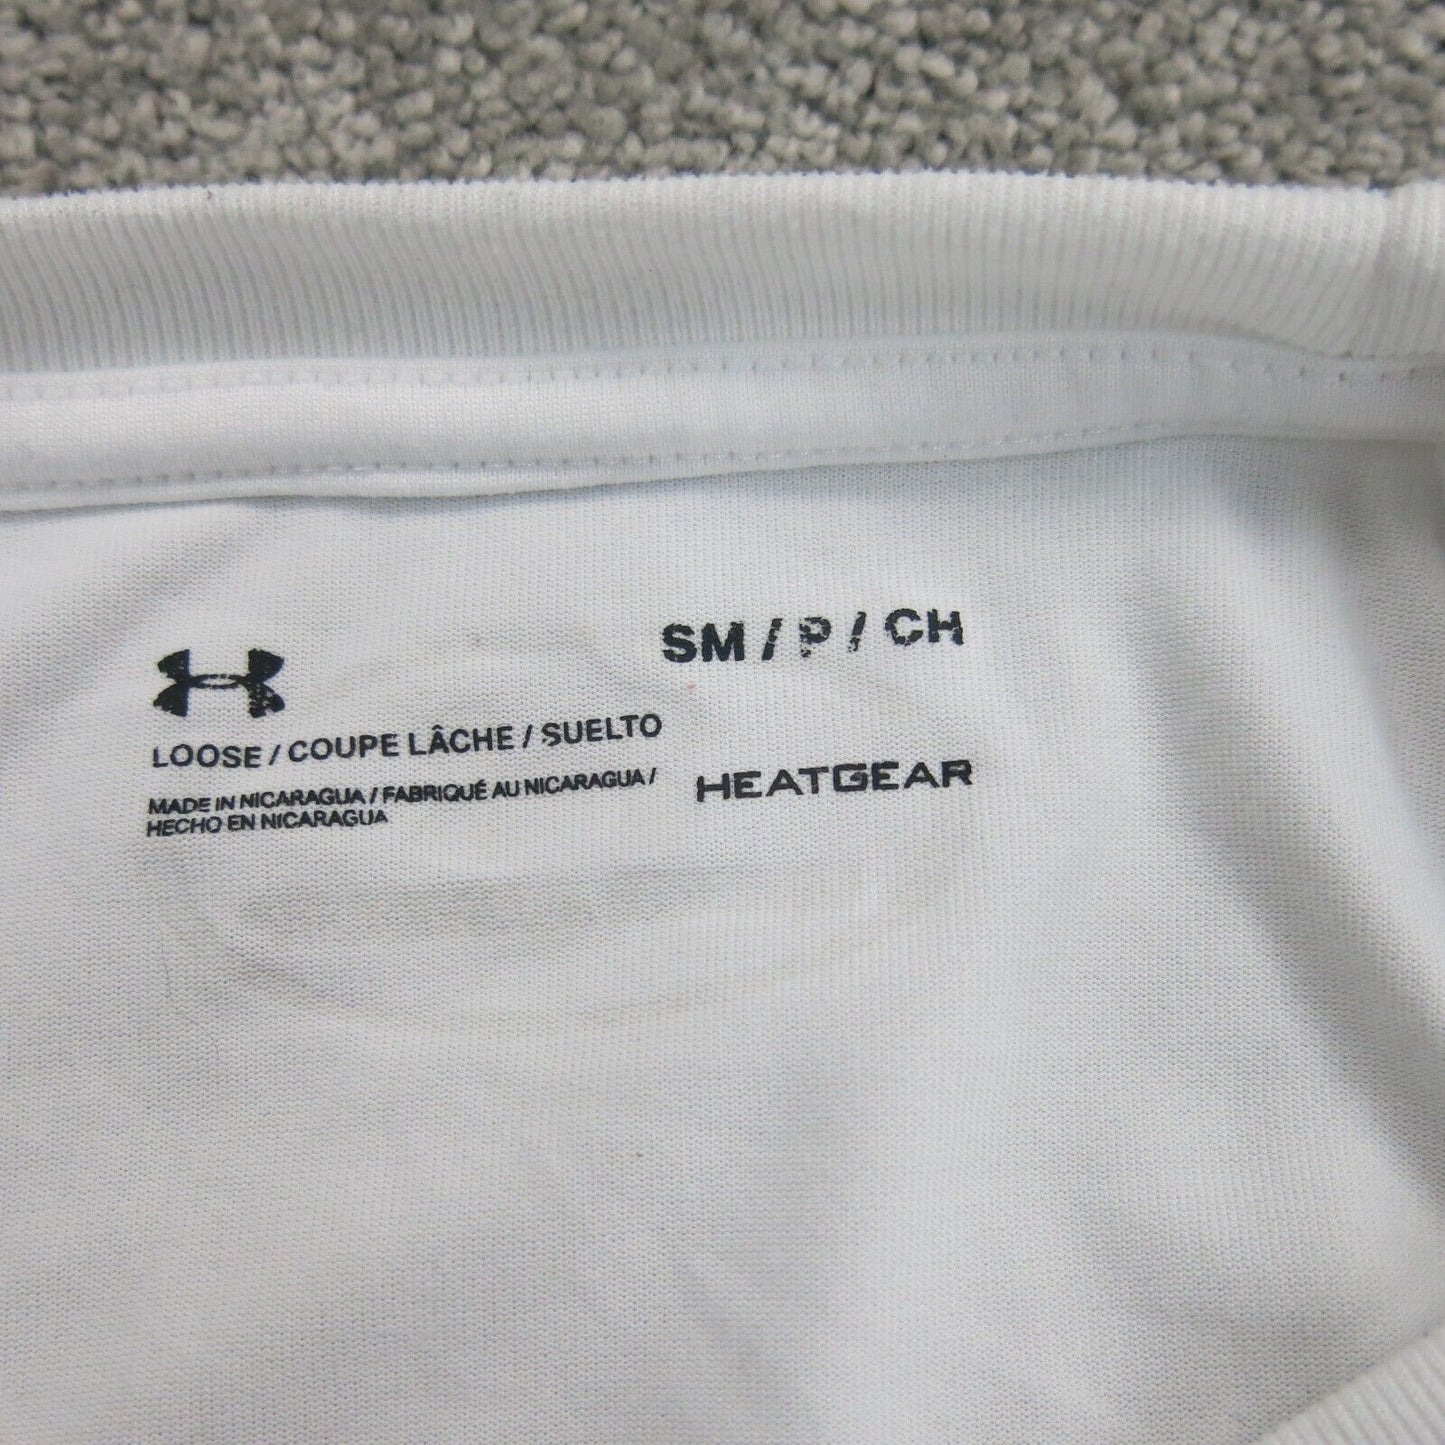 Under Armour Men T Shirt Crew Neck Graphic Tee Loose Fit Short Sleeve White SM/P